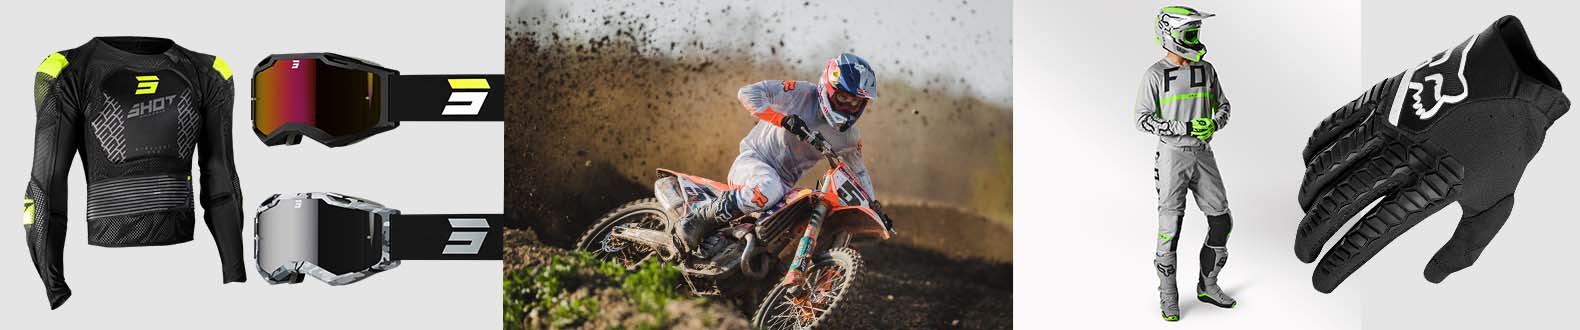 Motocross clothing, a small overview